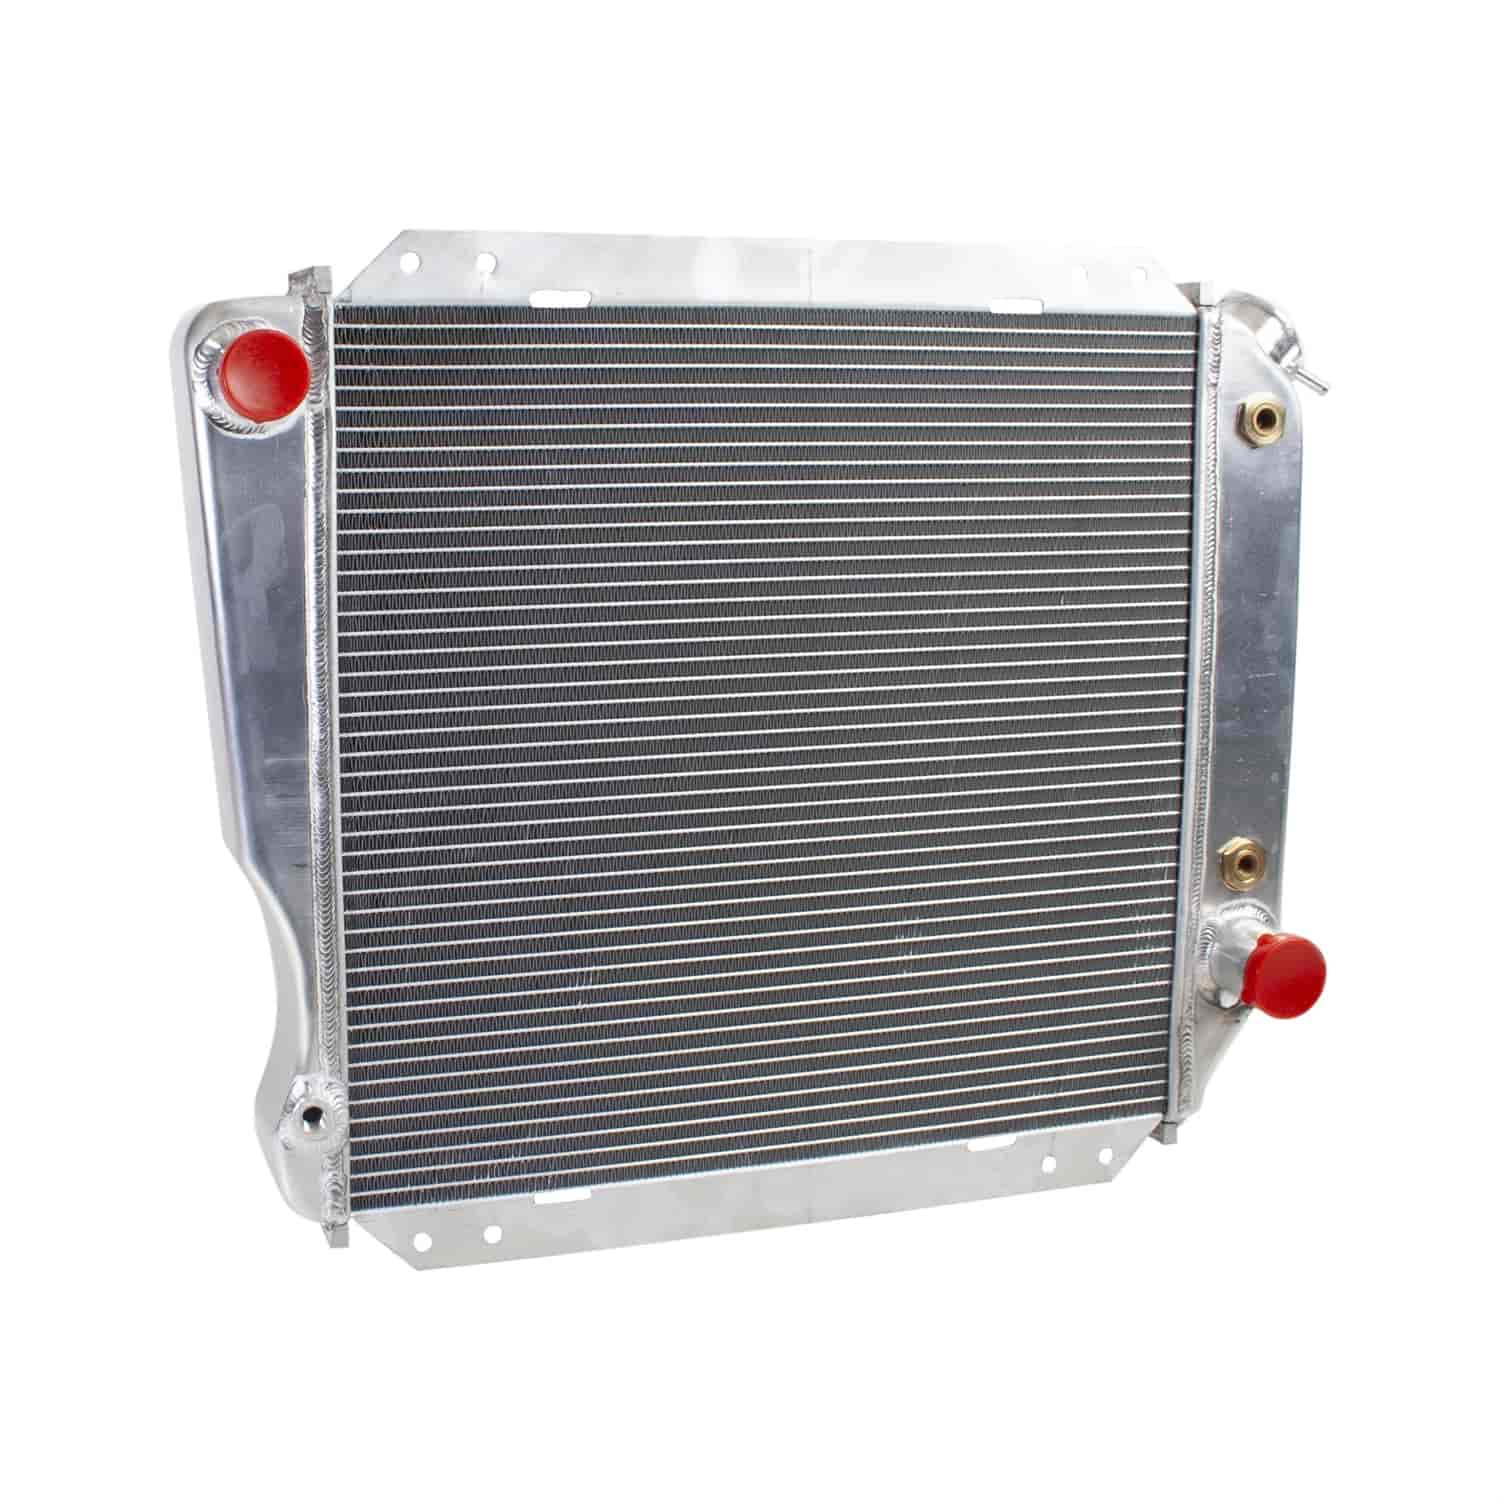 ExactFit Radiator for 1966-1977 Ford Bronco with Early Small Block Ford or Chevy V8 Swap